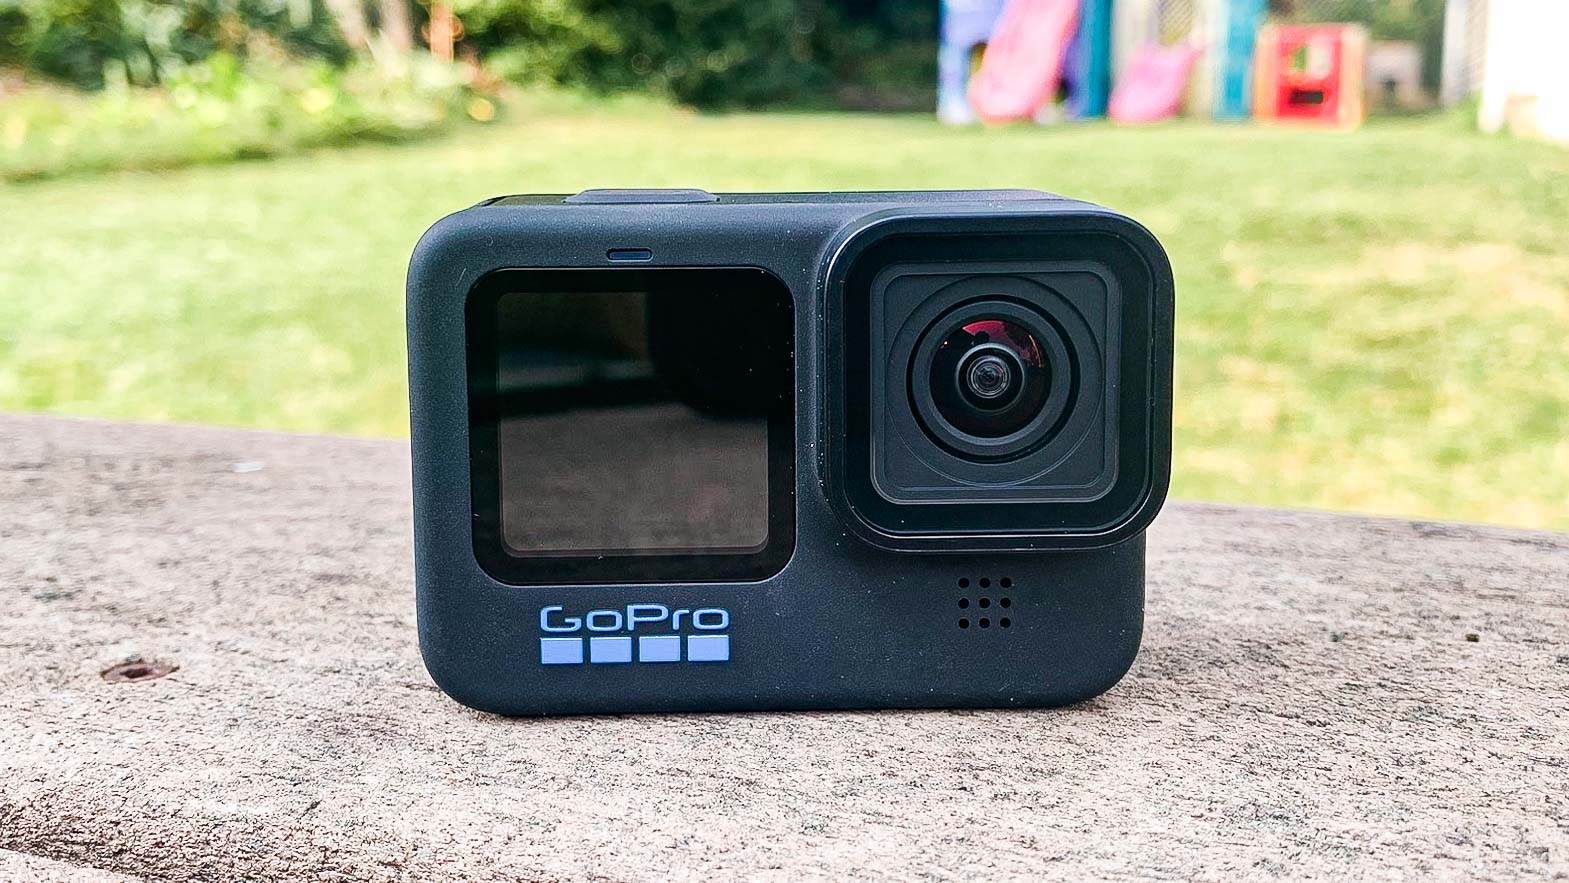 The GoPro Hero10 Black is one of the best cameras